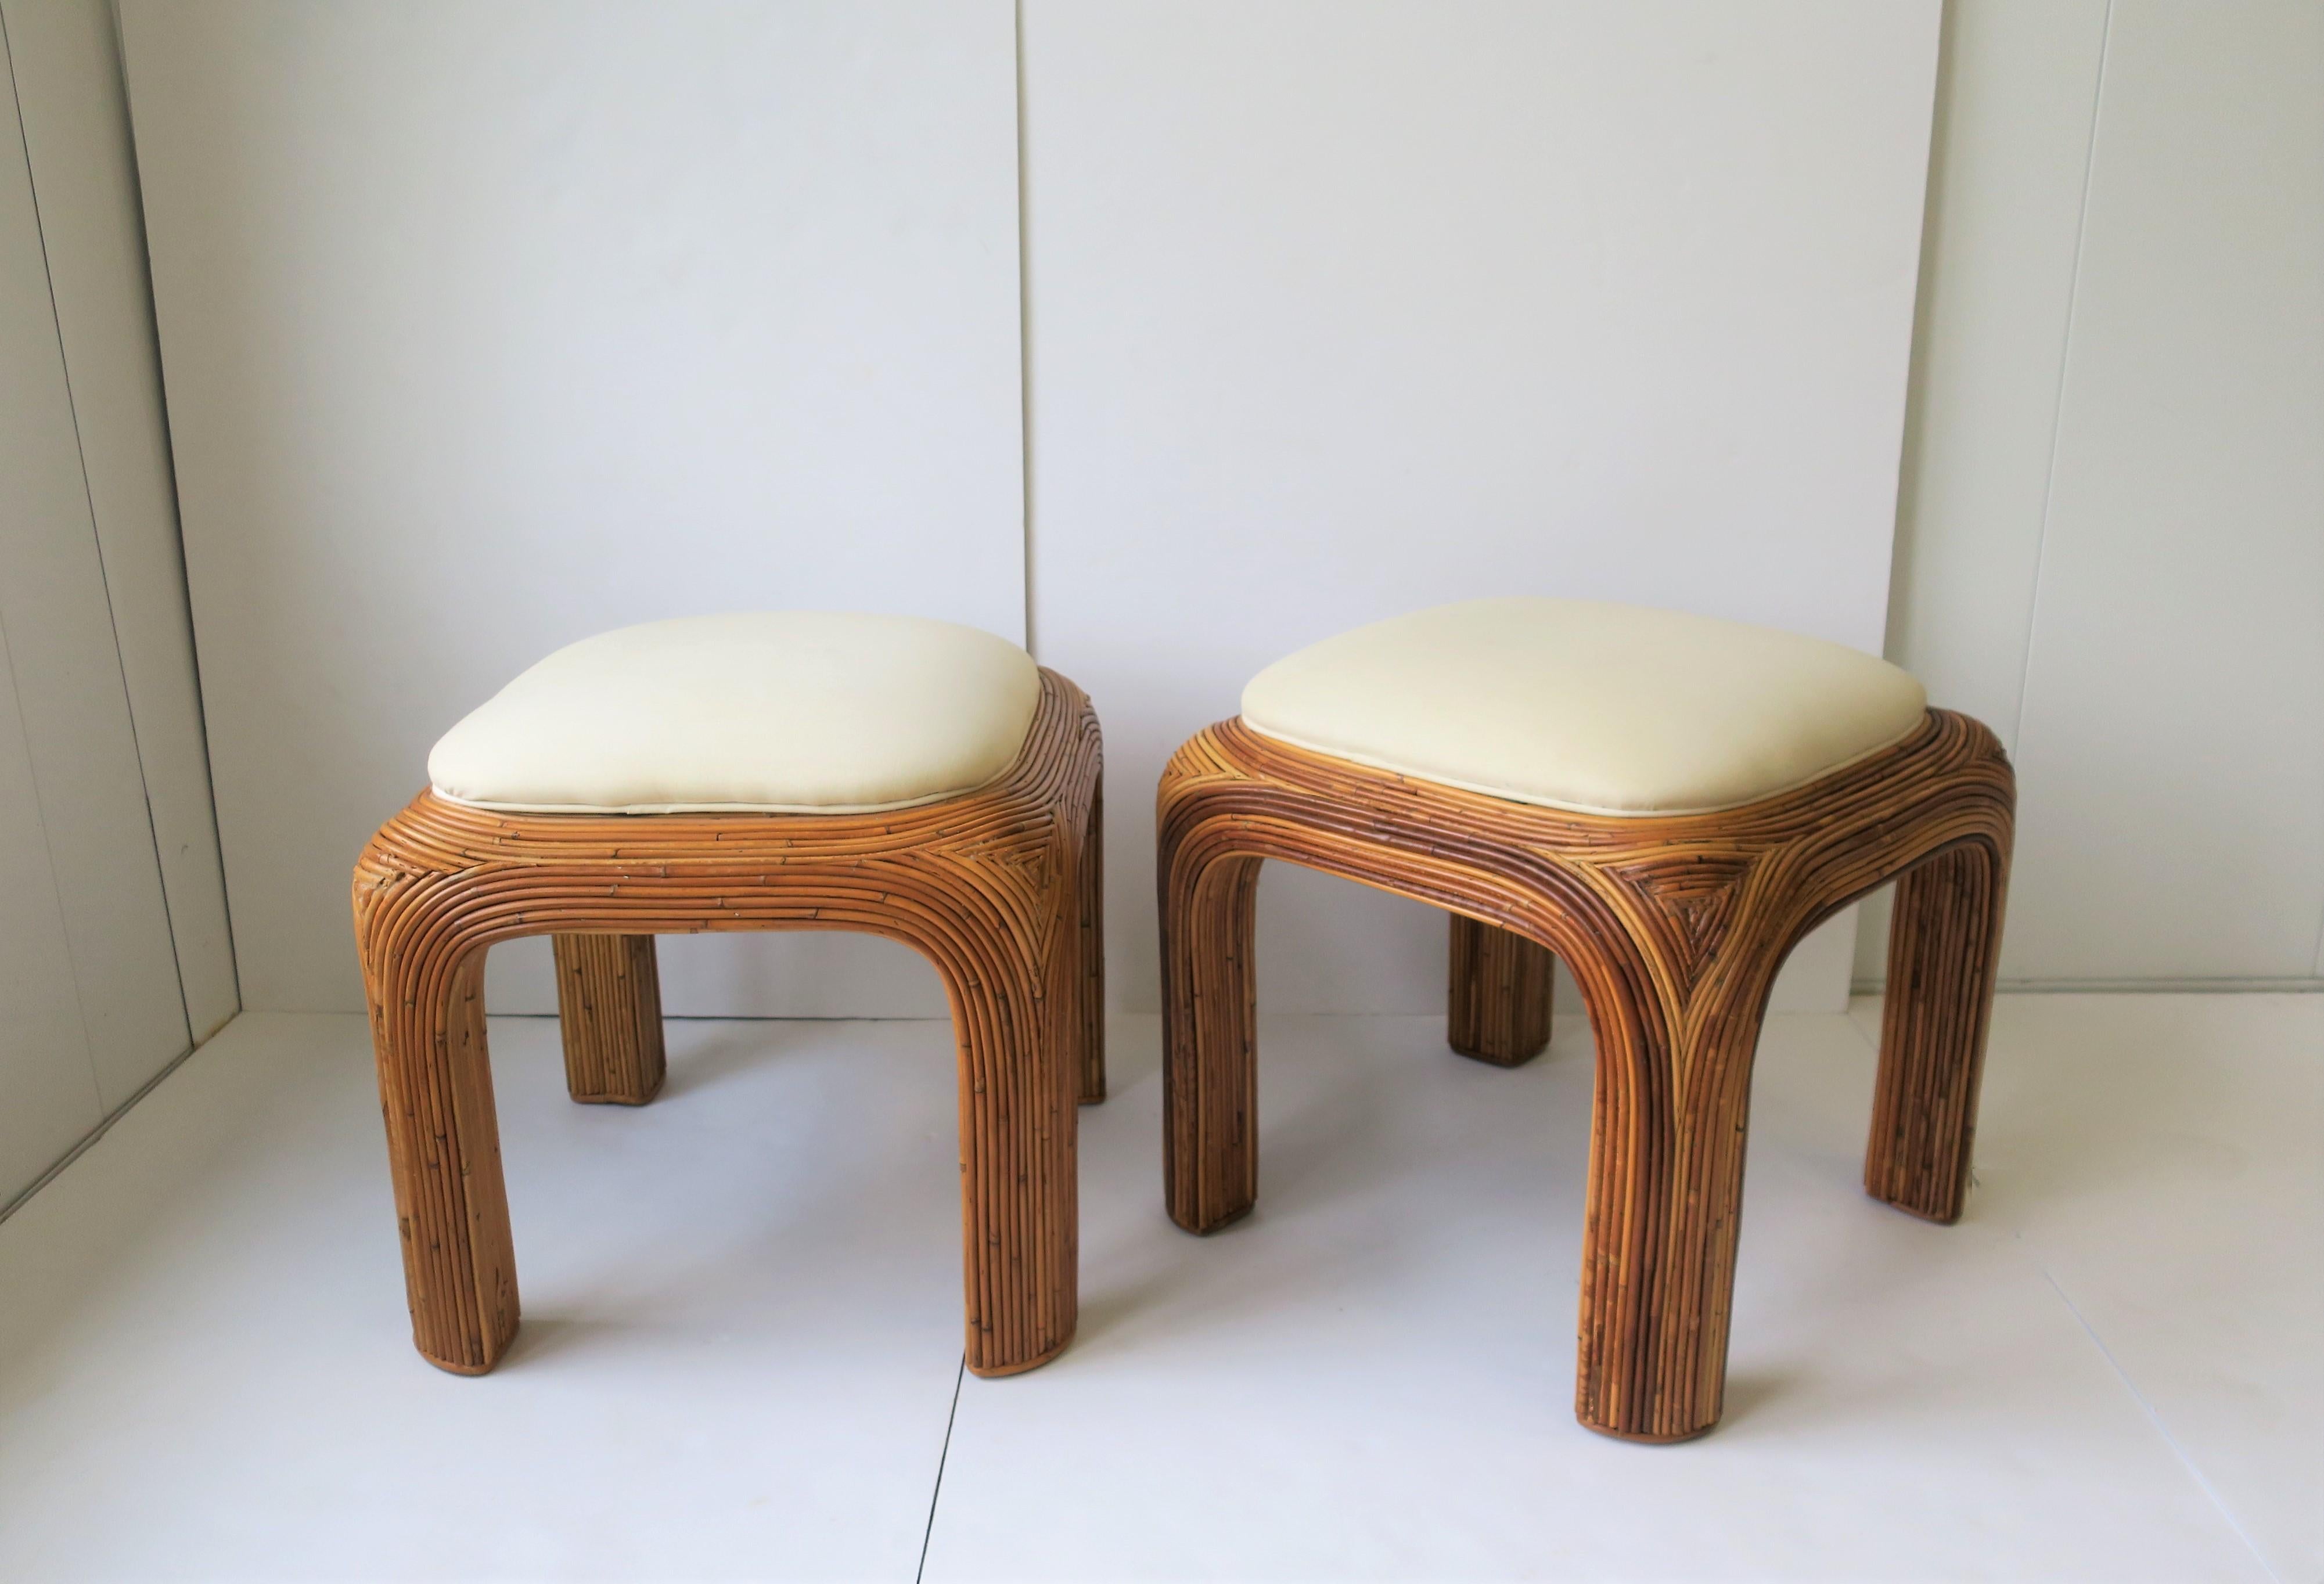 pencil stool pictures